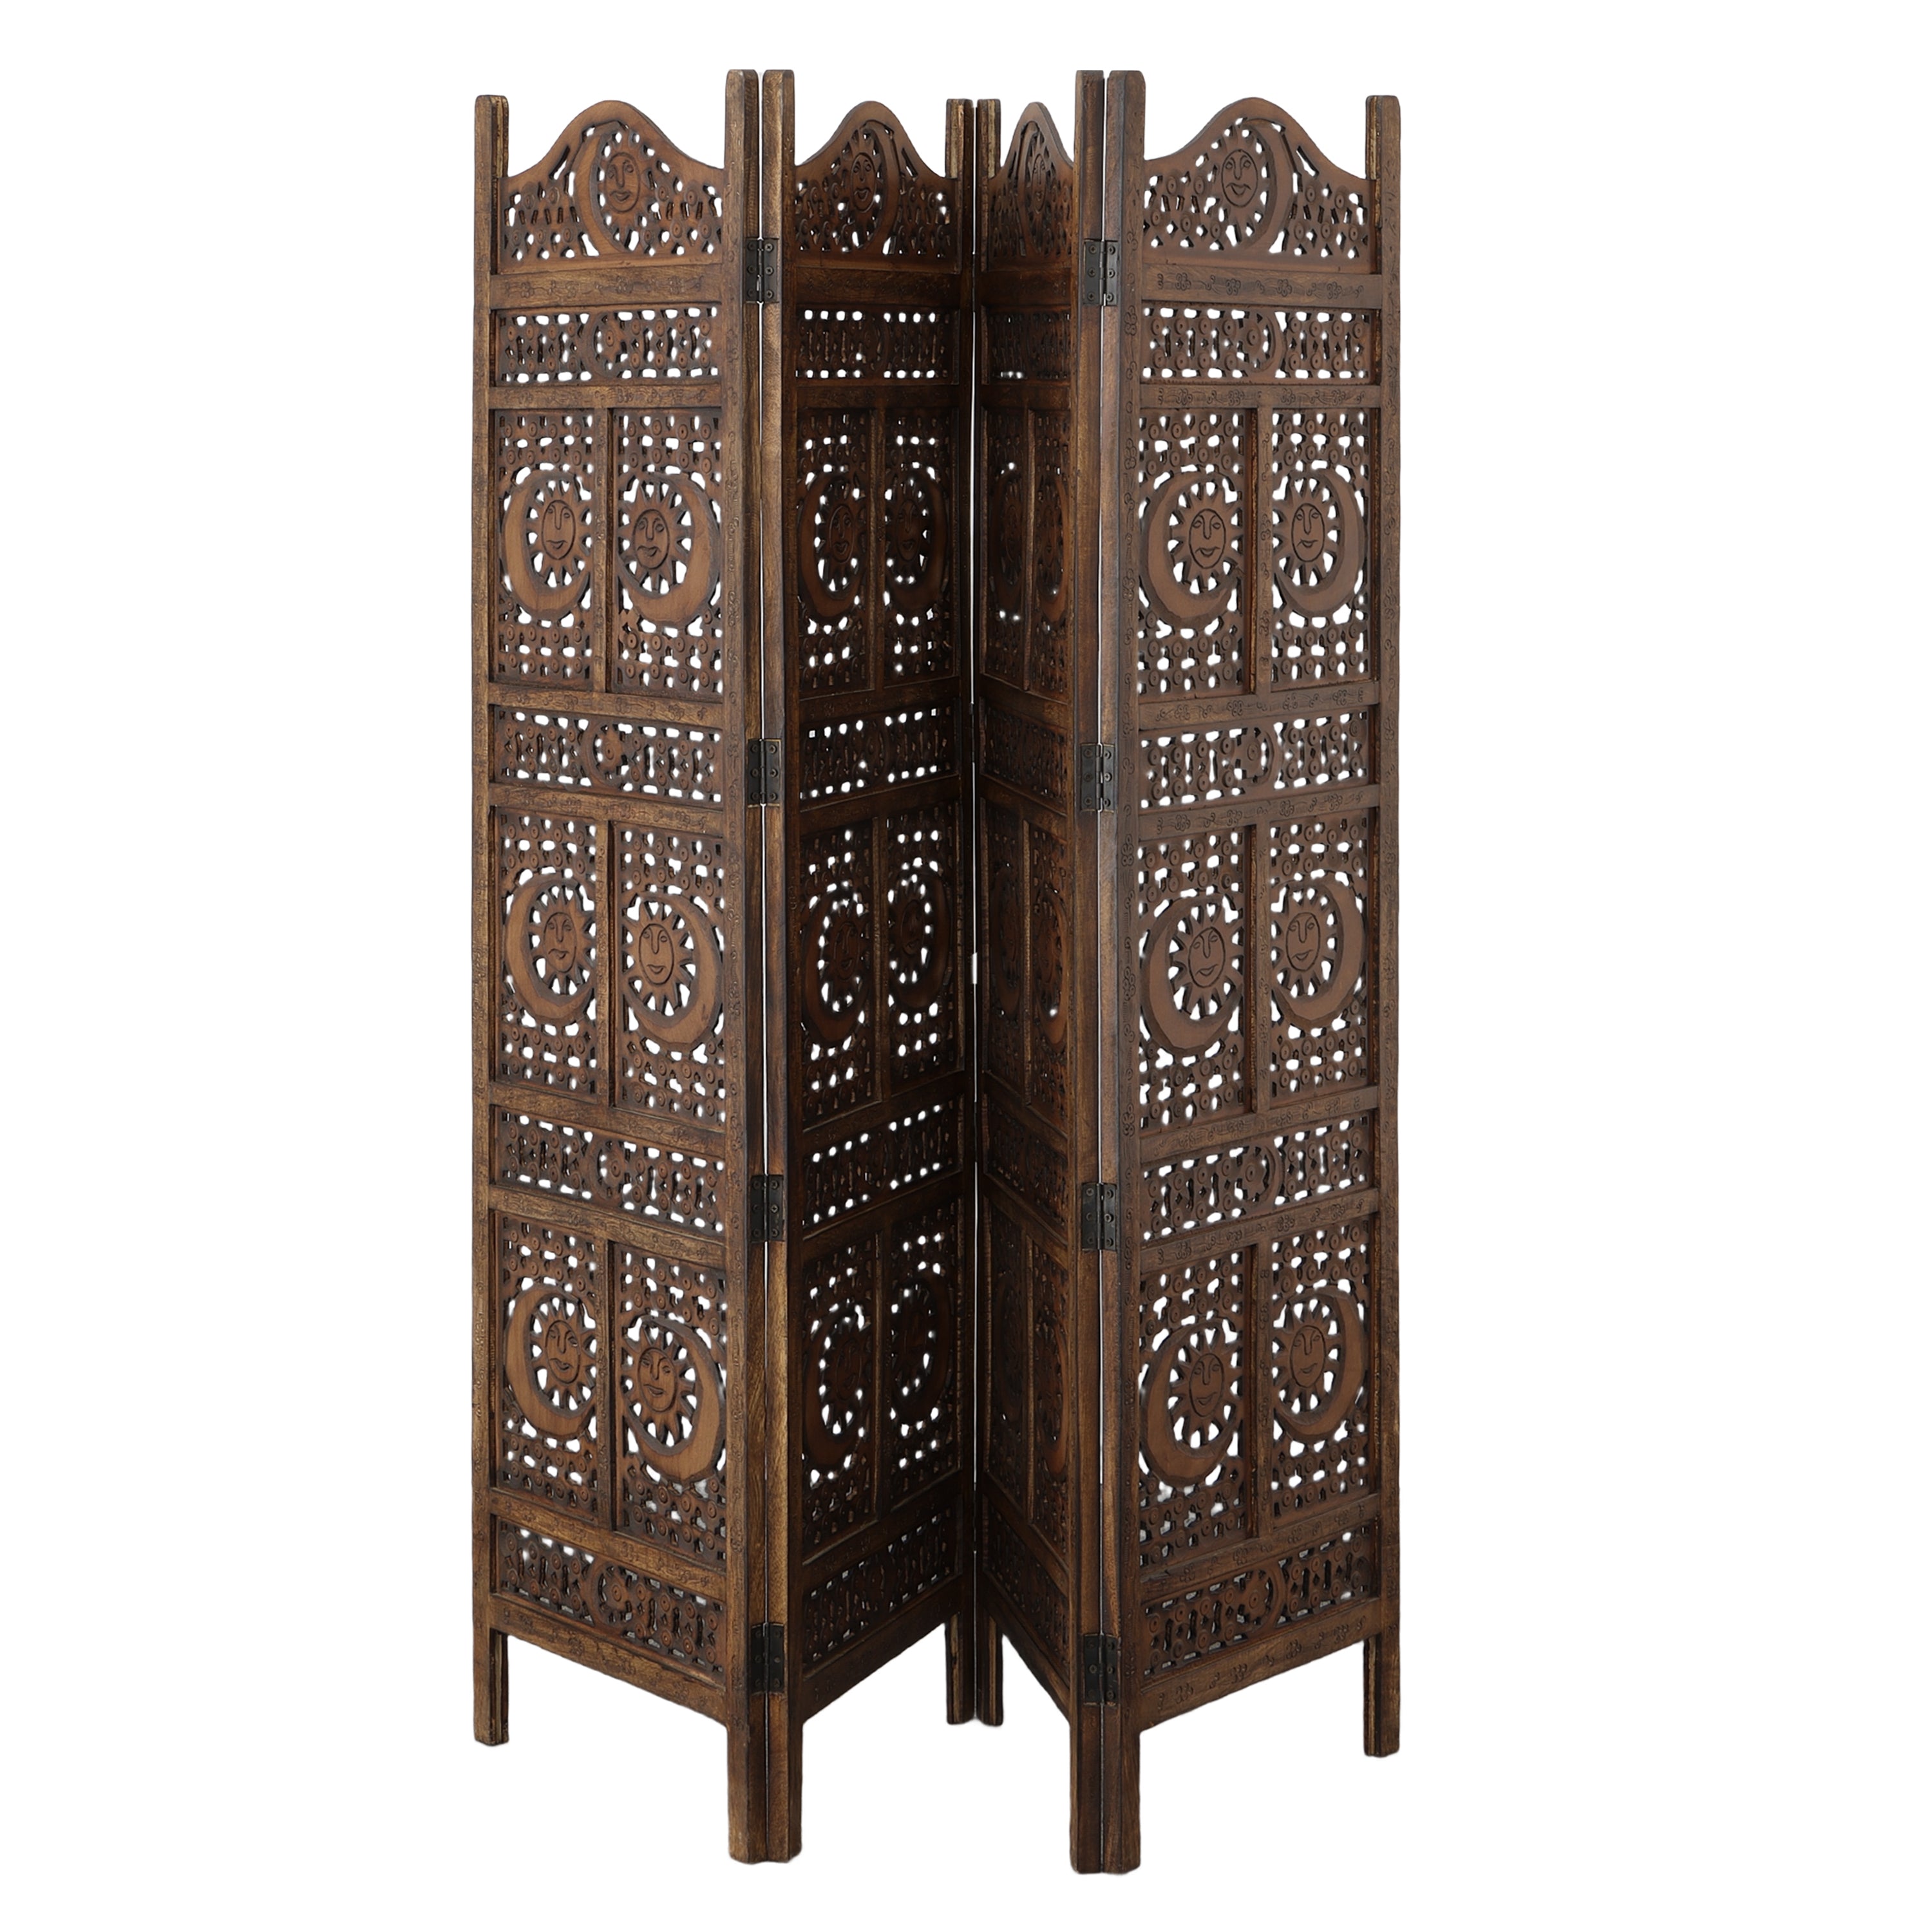 Hand Carved Sun And Moon Design Foldable 4 Panel Wooden Room Divider - Brown